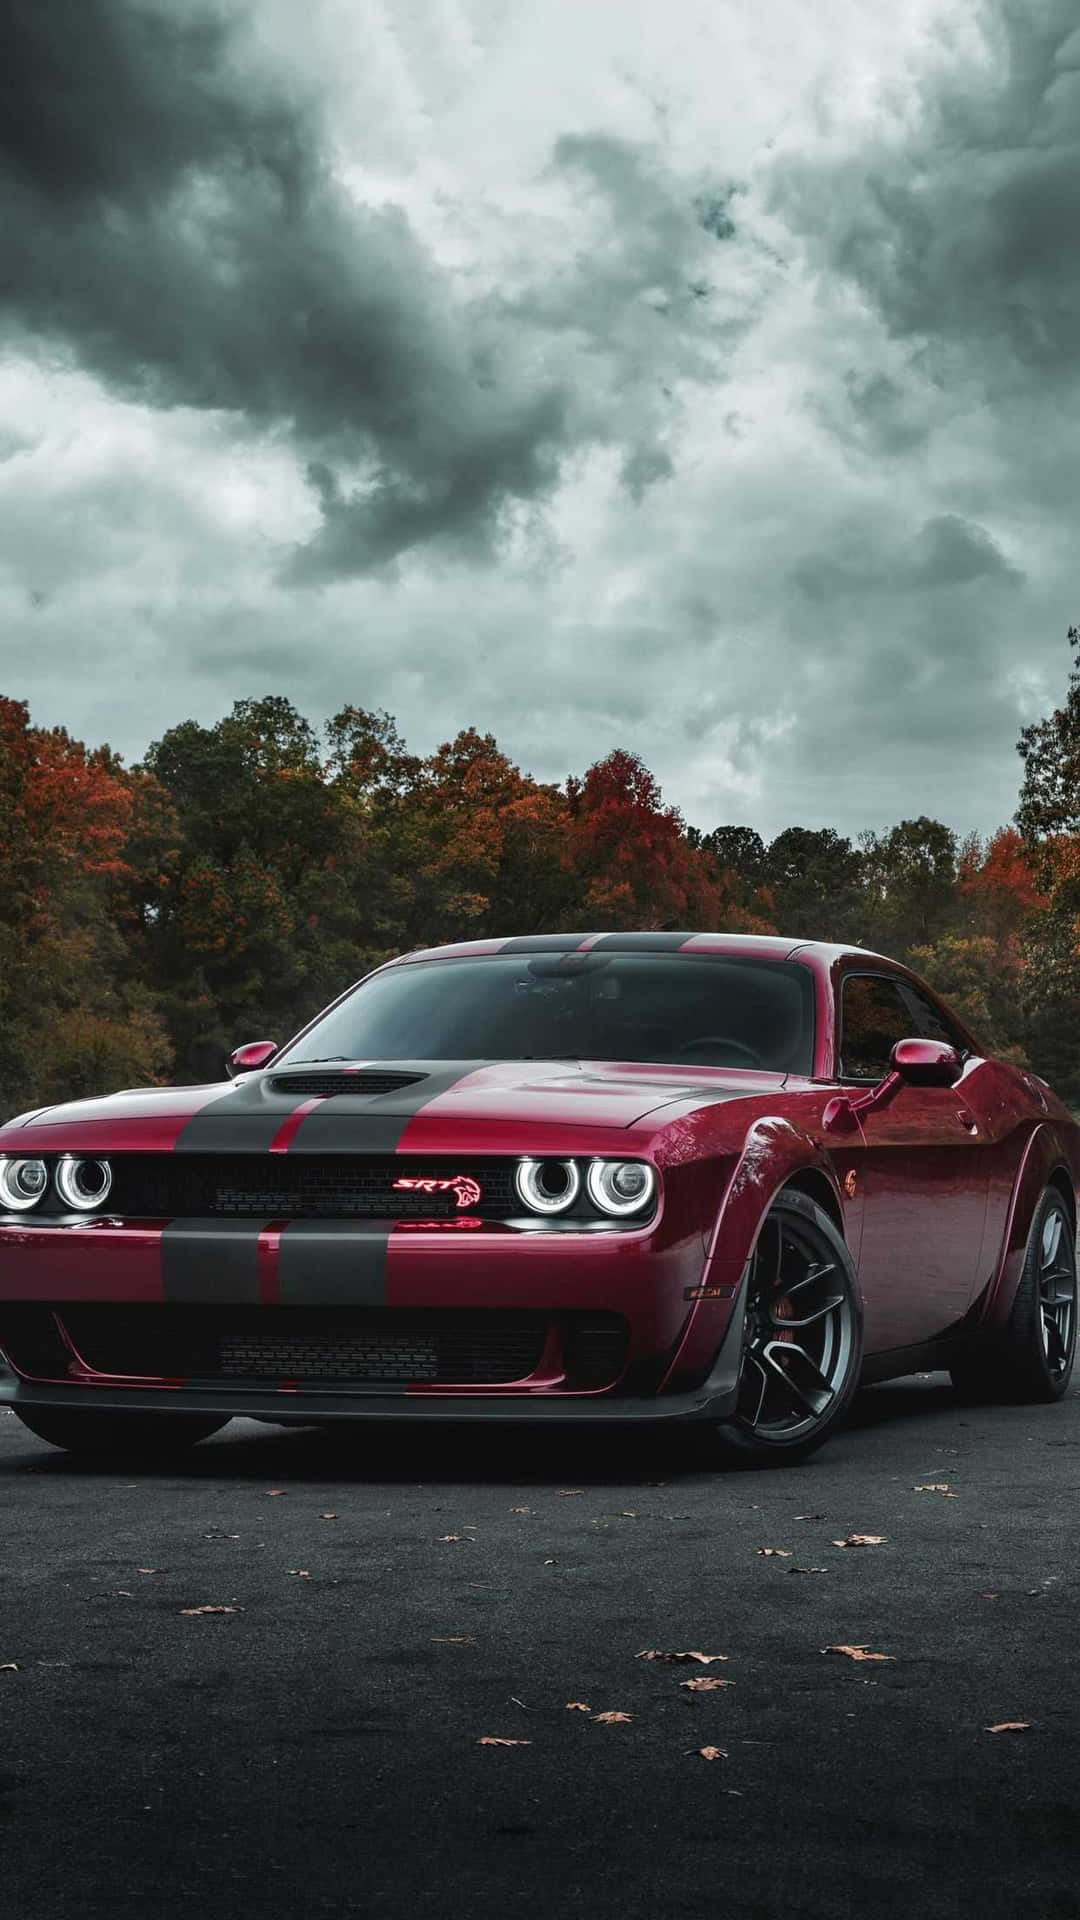 Dodgechallenger Srt Srt Srt Srt Srt Srt Srt Would Be Translated As 